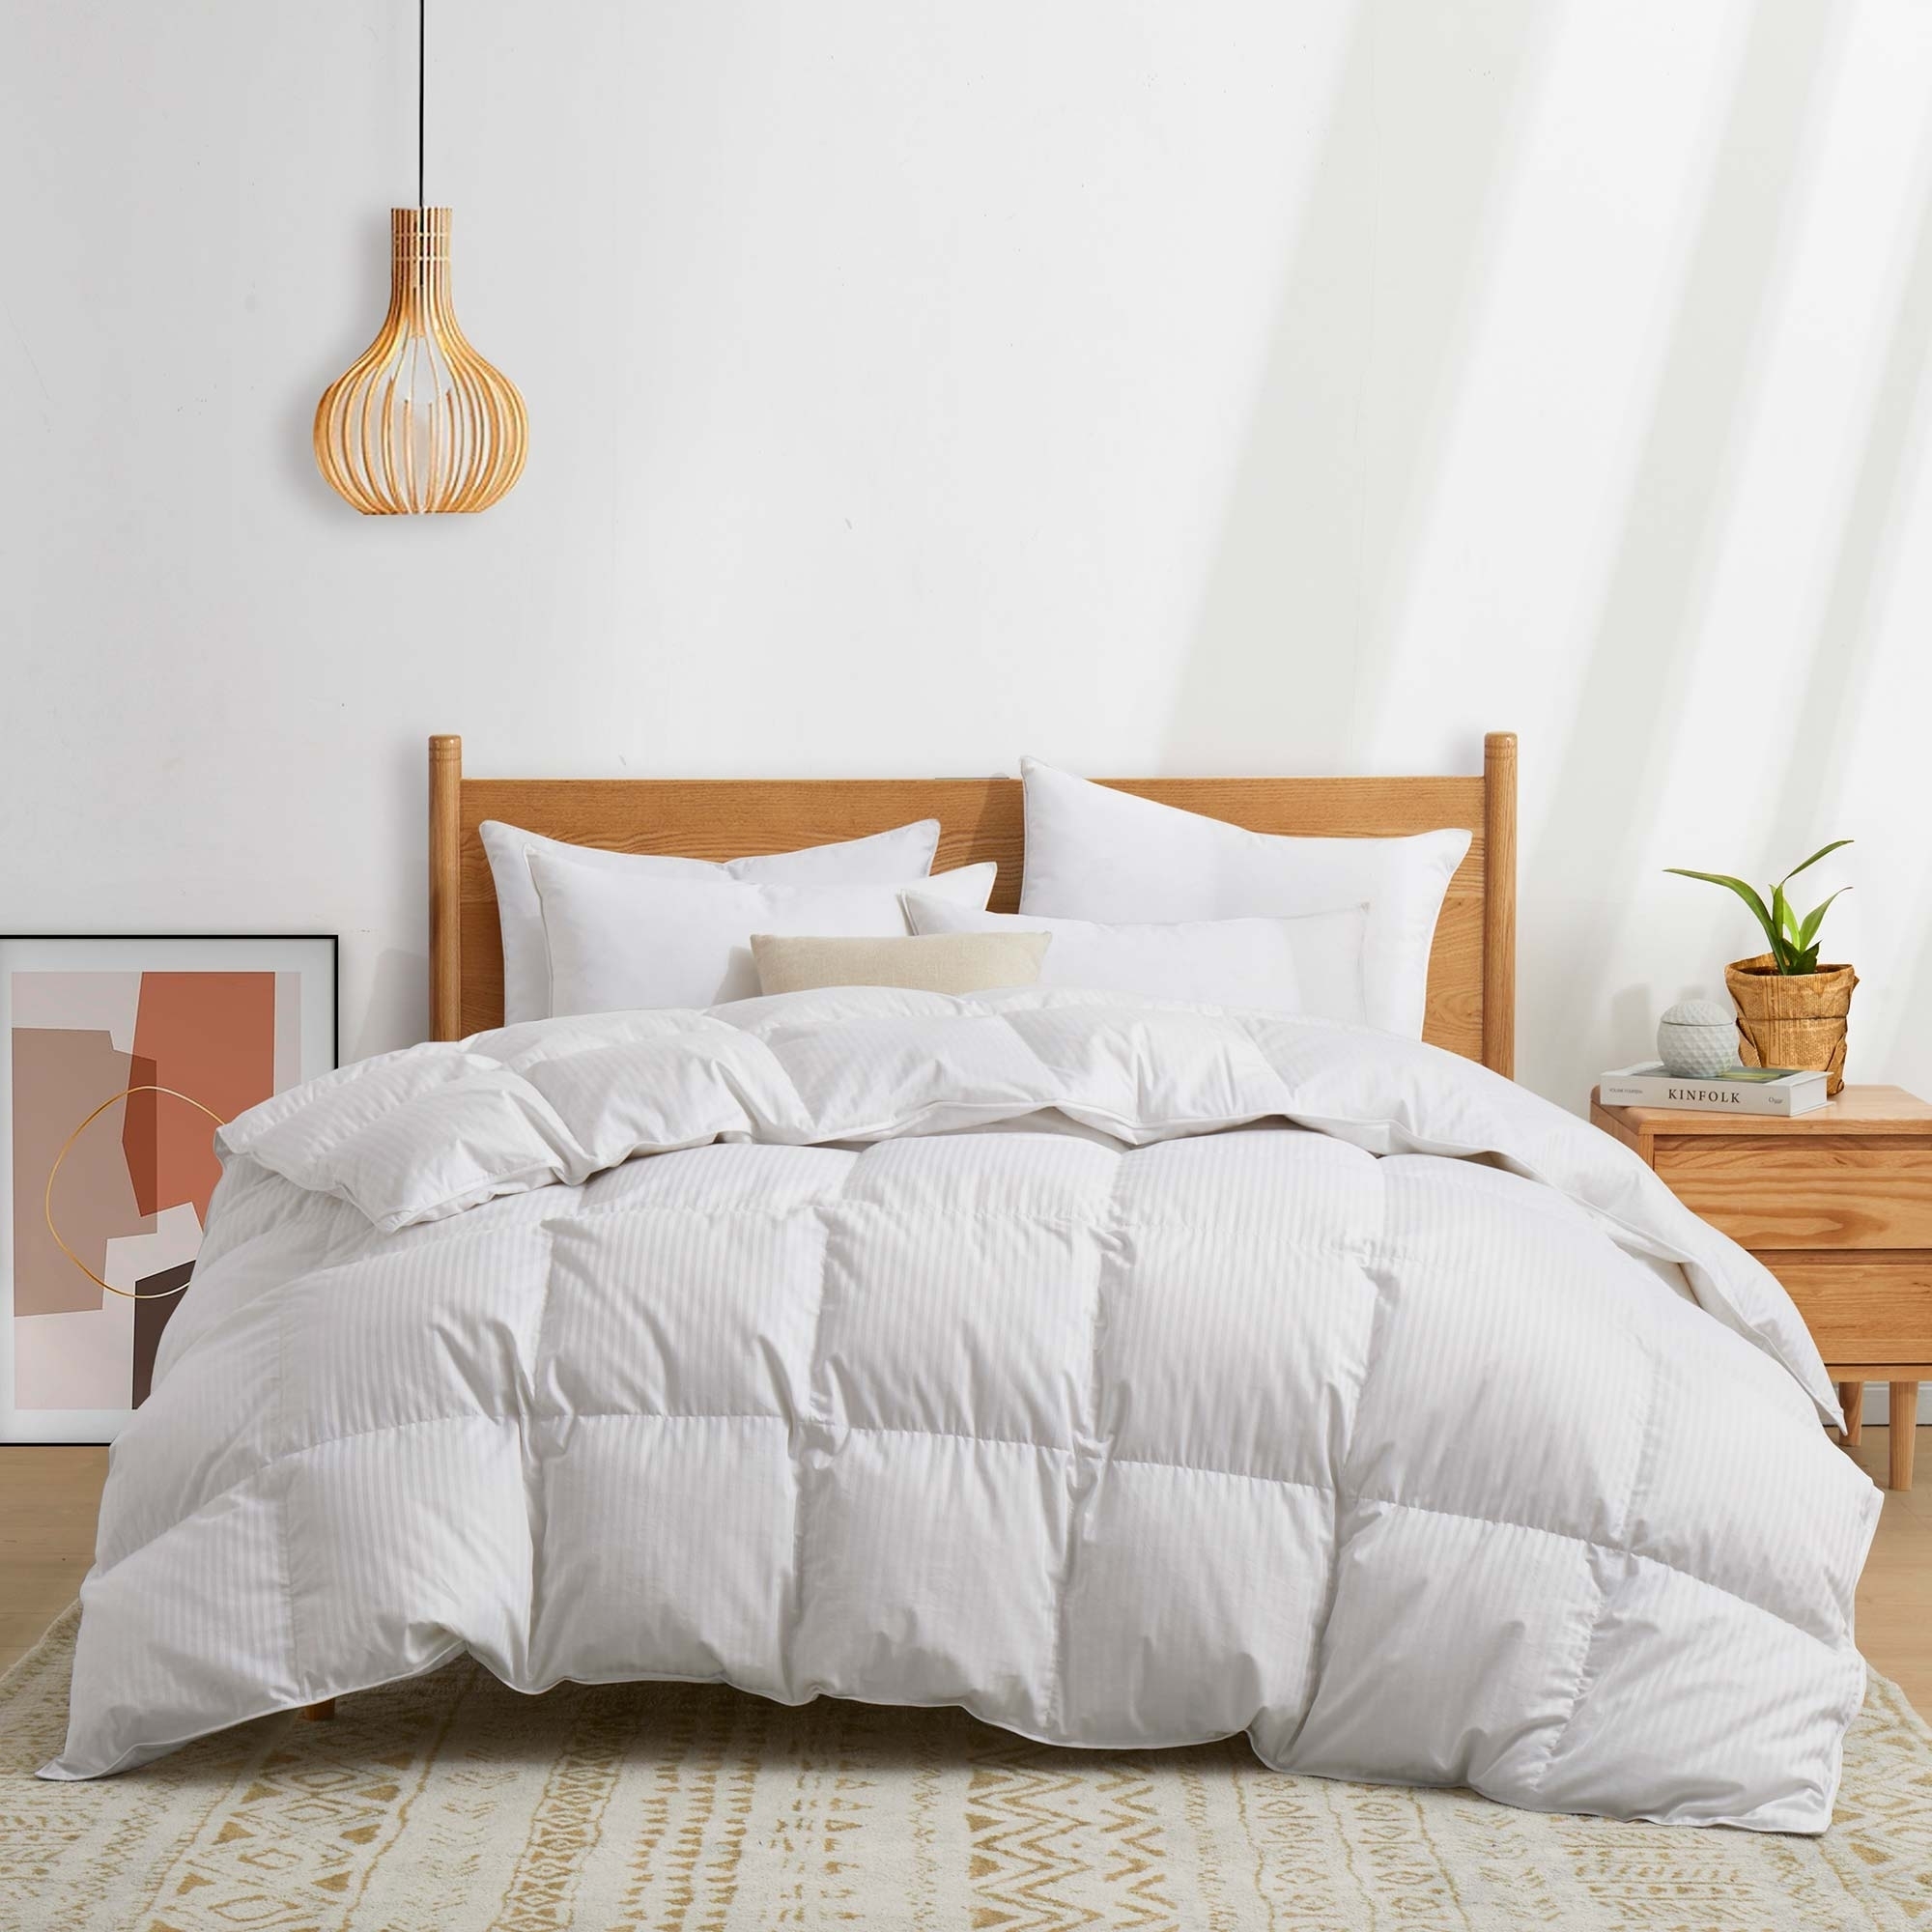 Made In Germany 800 Fill Power Luxurious European White Down Comforter-Heavy Weight Comforter& Medium Weight Comforter - Medium Weight, Full